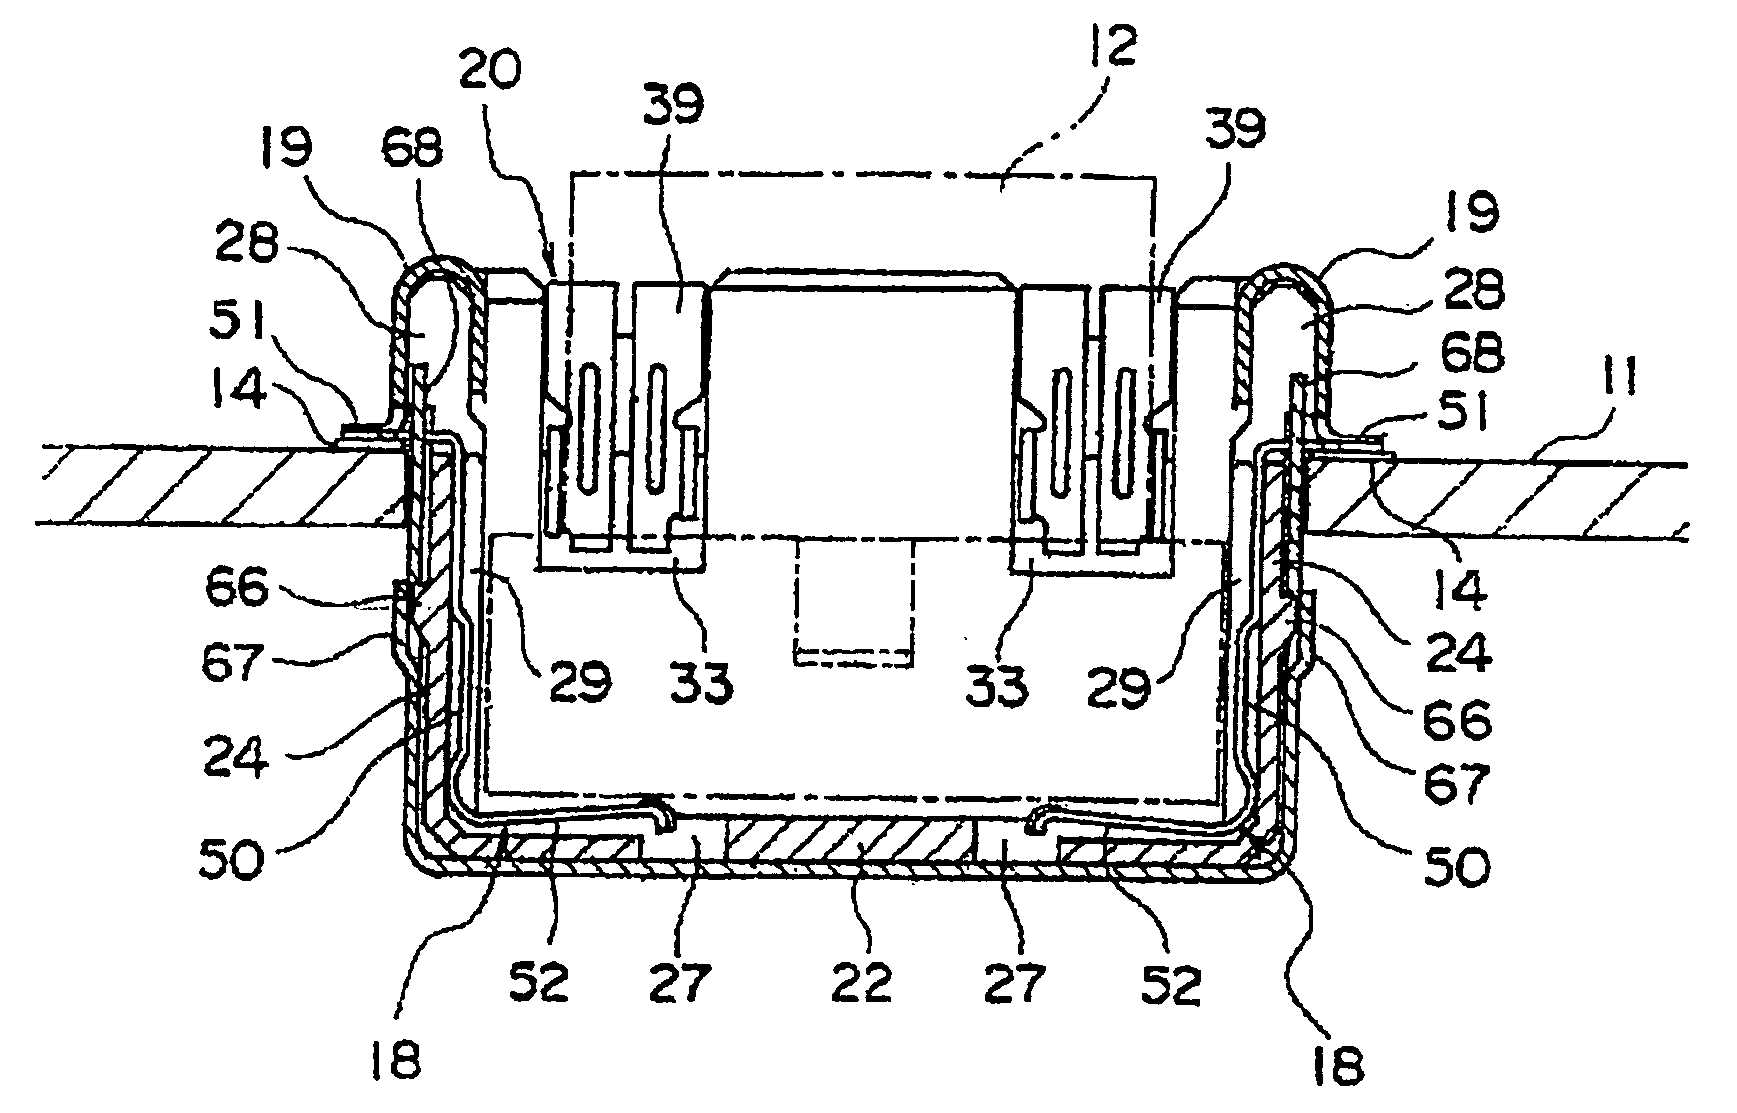 Socket for installing electronic parts